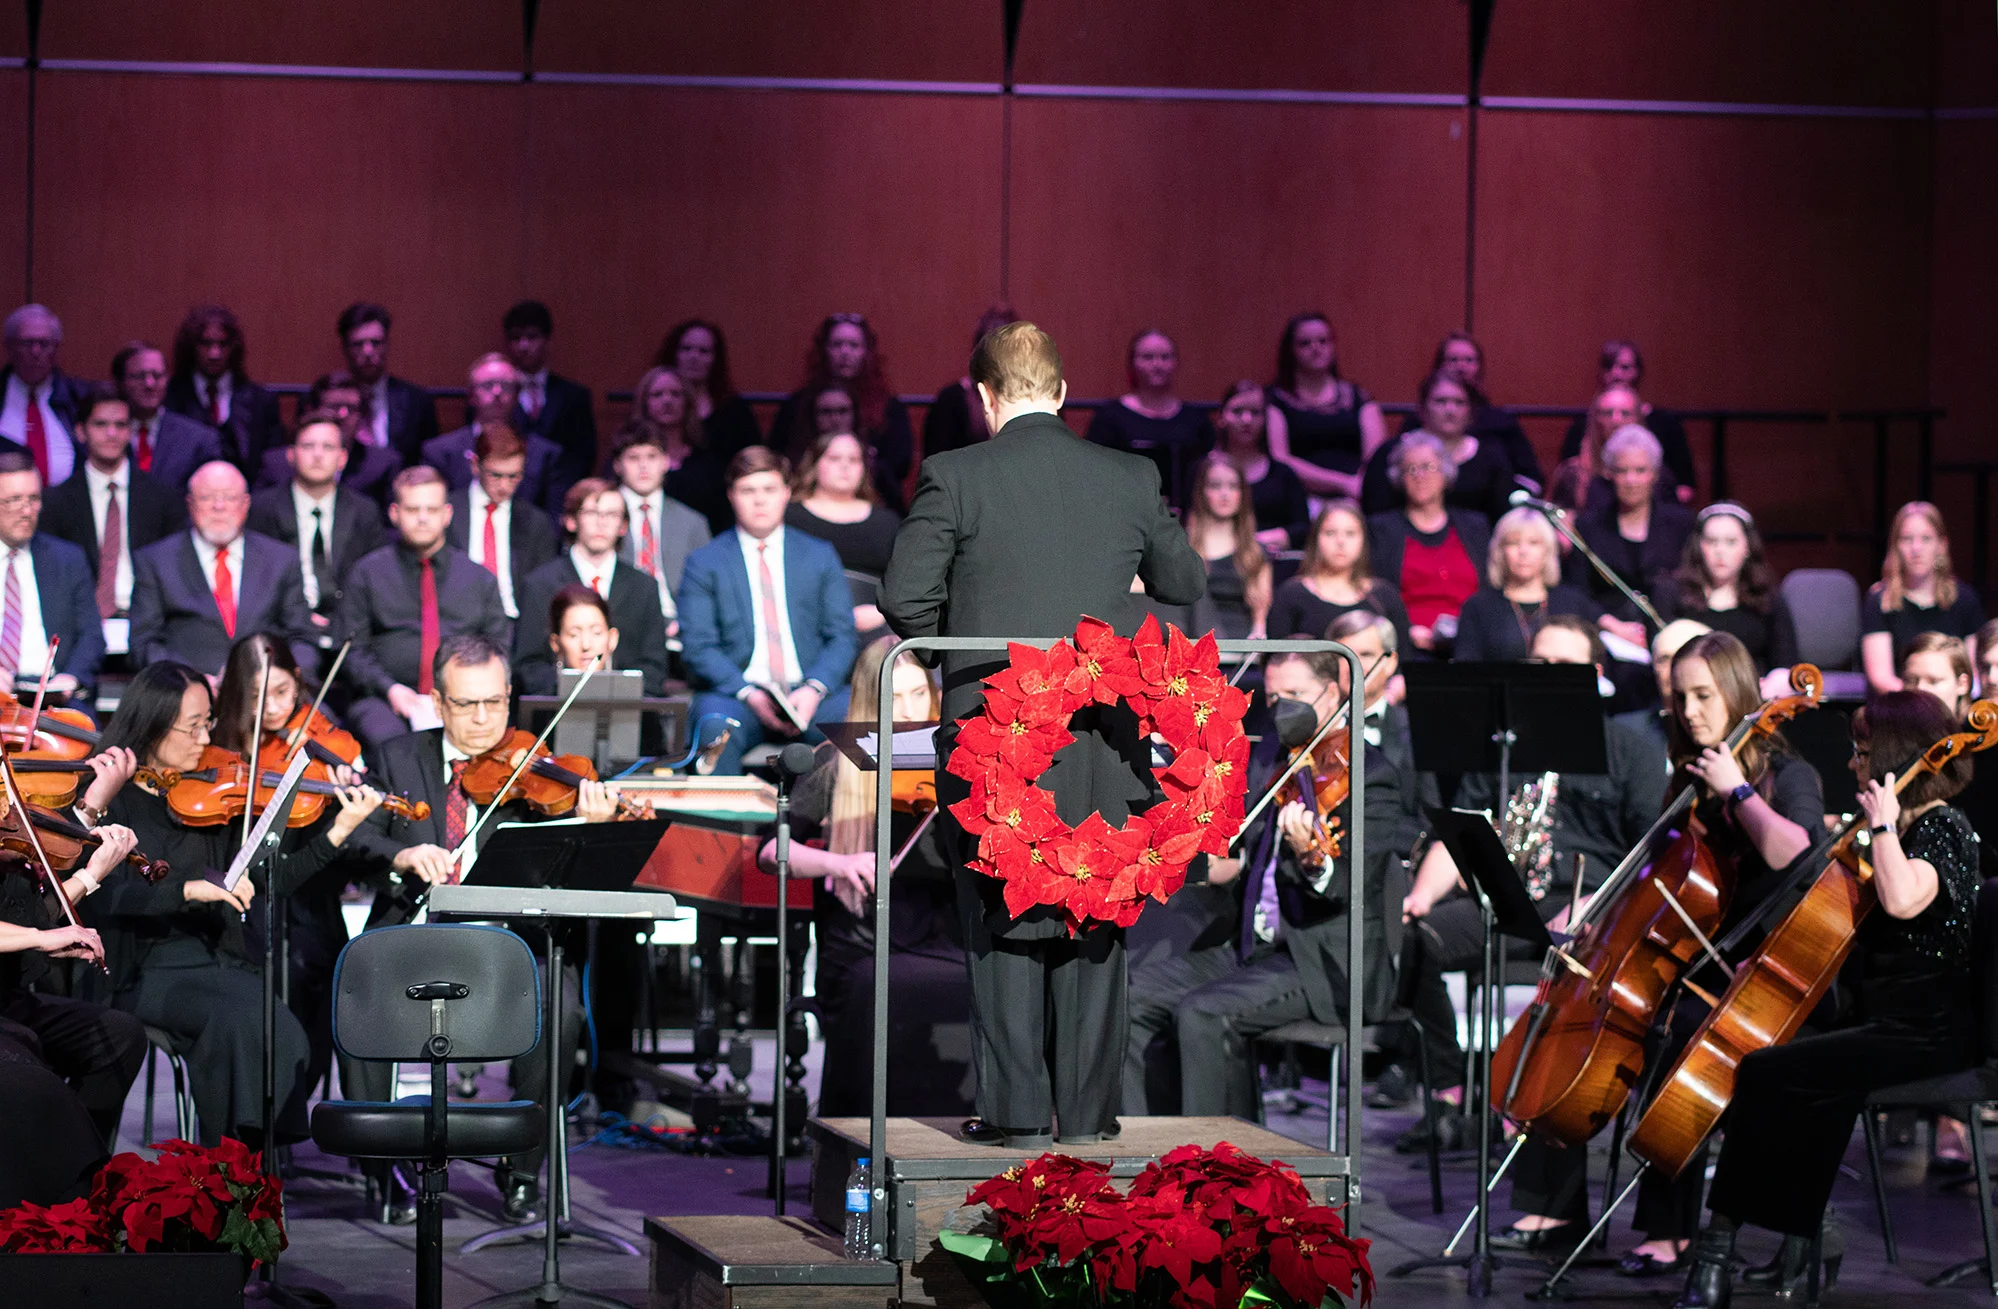 EAC to present its 86th annual performance of Handel’s Messiah